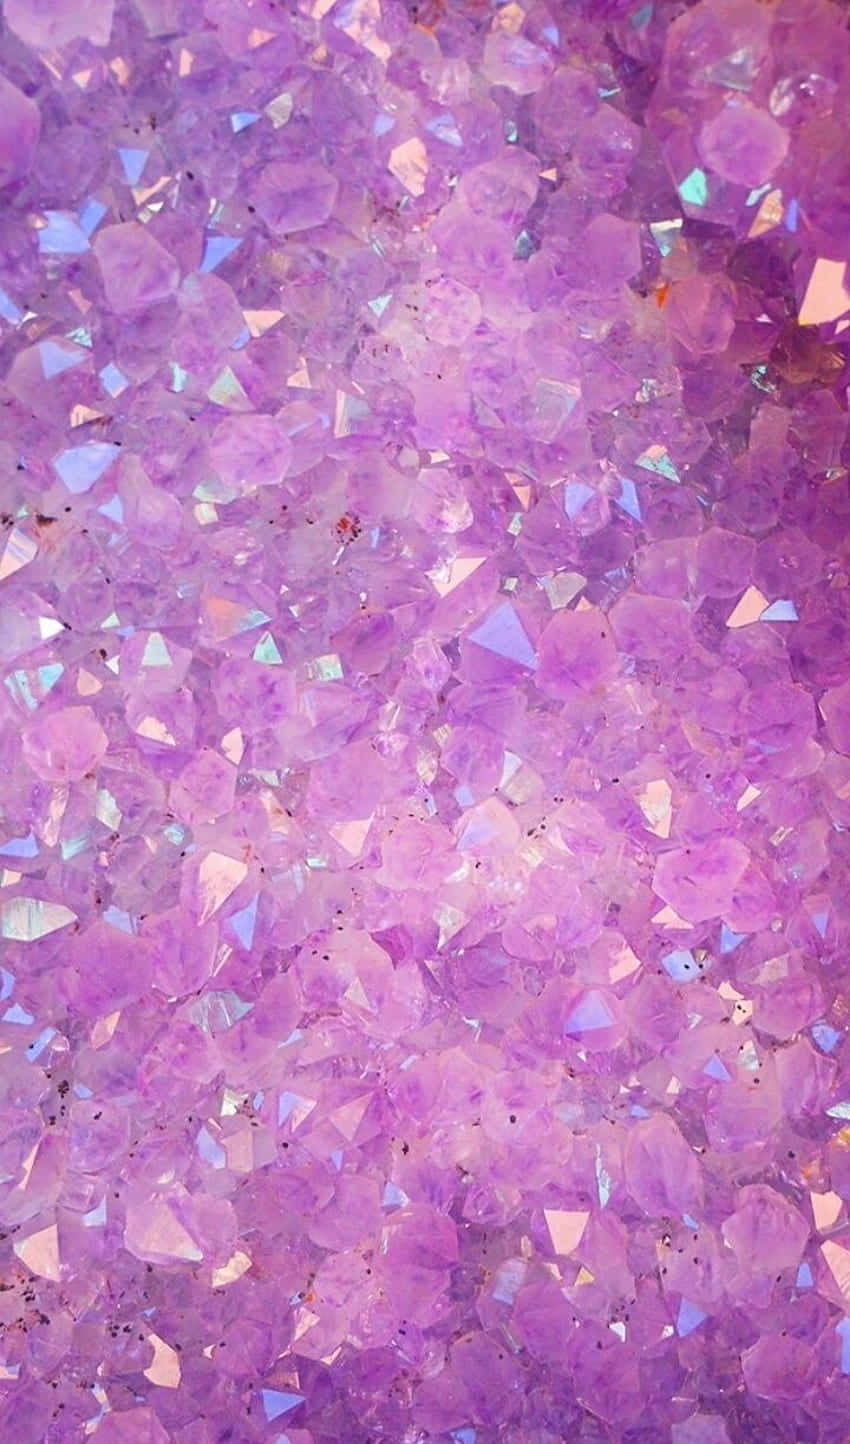 Get lost in the mystic beauty of Pastel Crystals Wallpaper